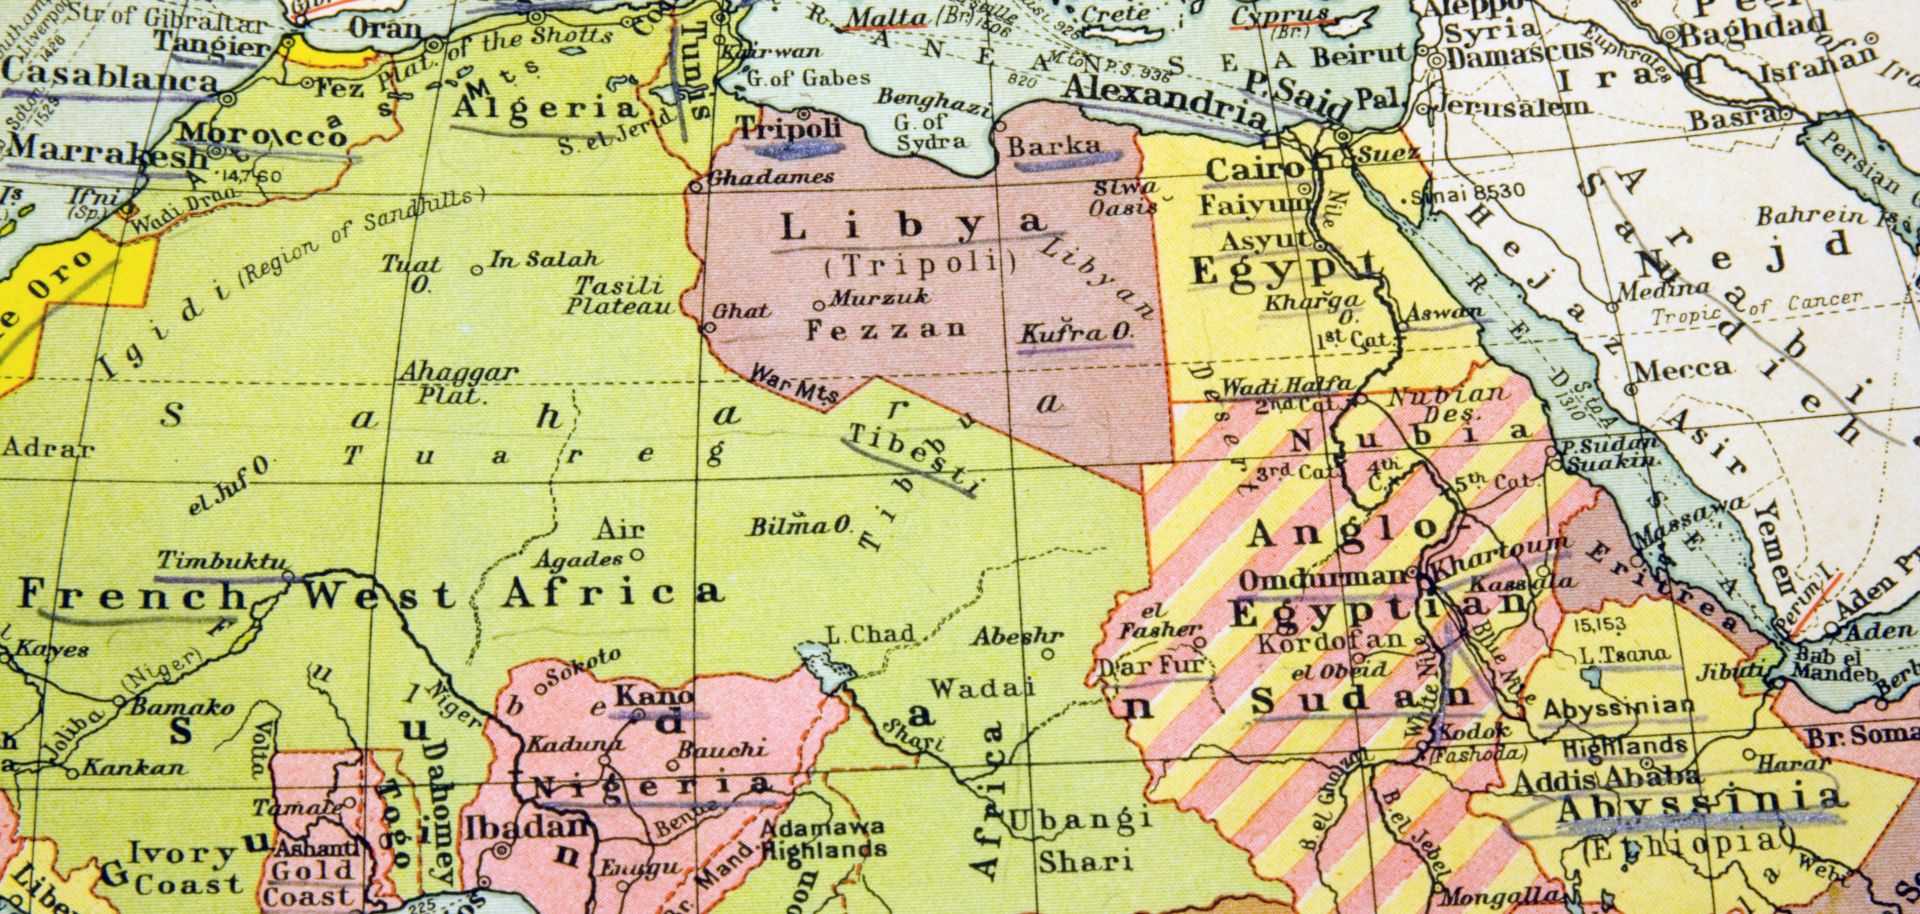 An old map labels African countries and regions by their colonial names.